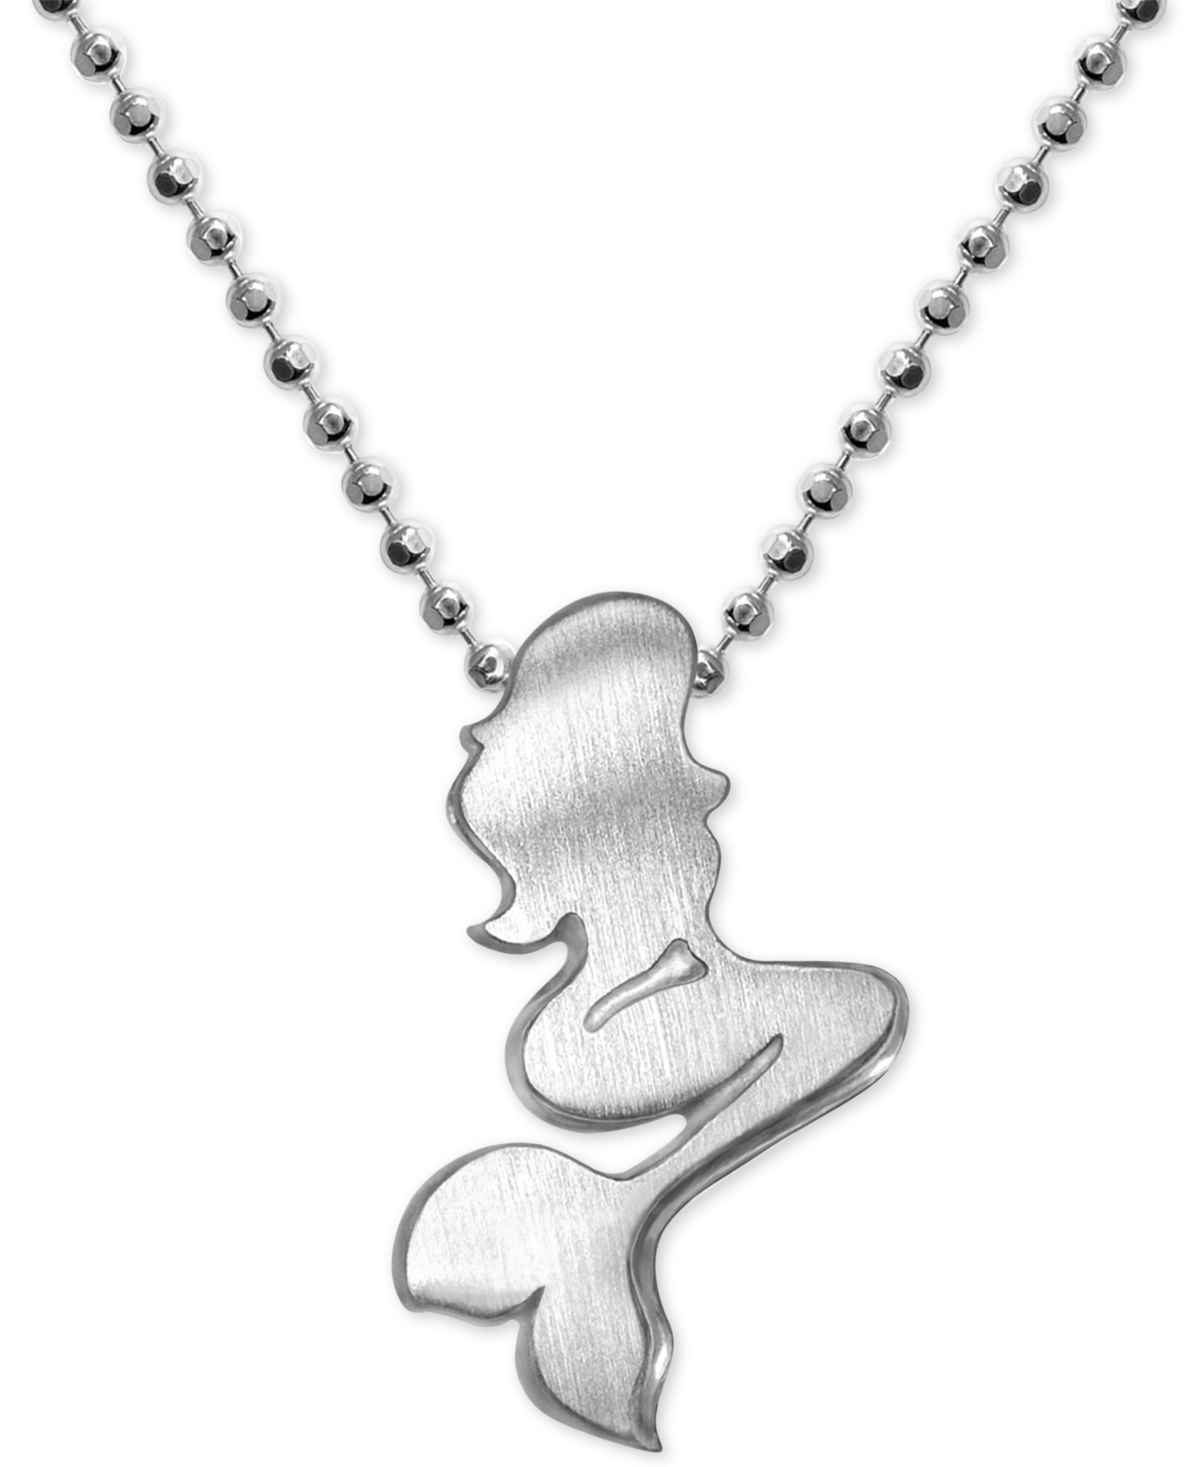 Mermaid Pendant Necklace in Sterling Silver - Sterling Silver